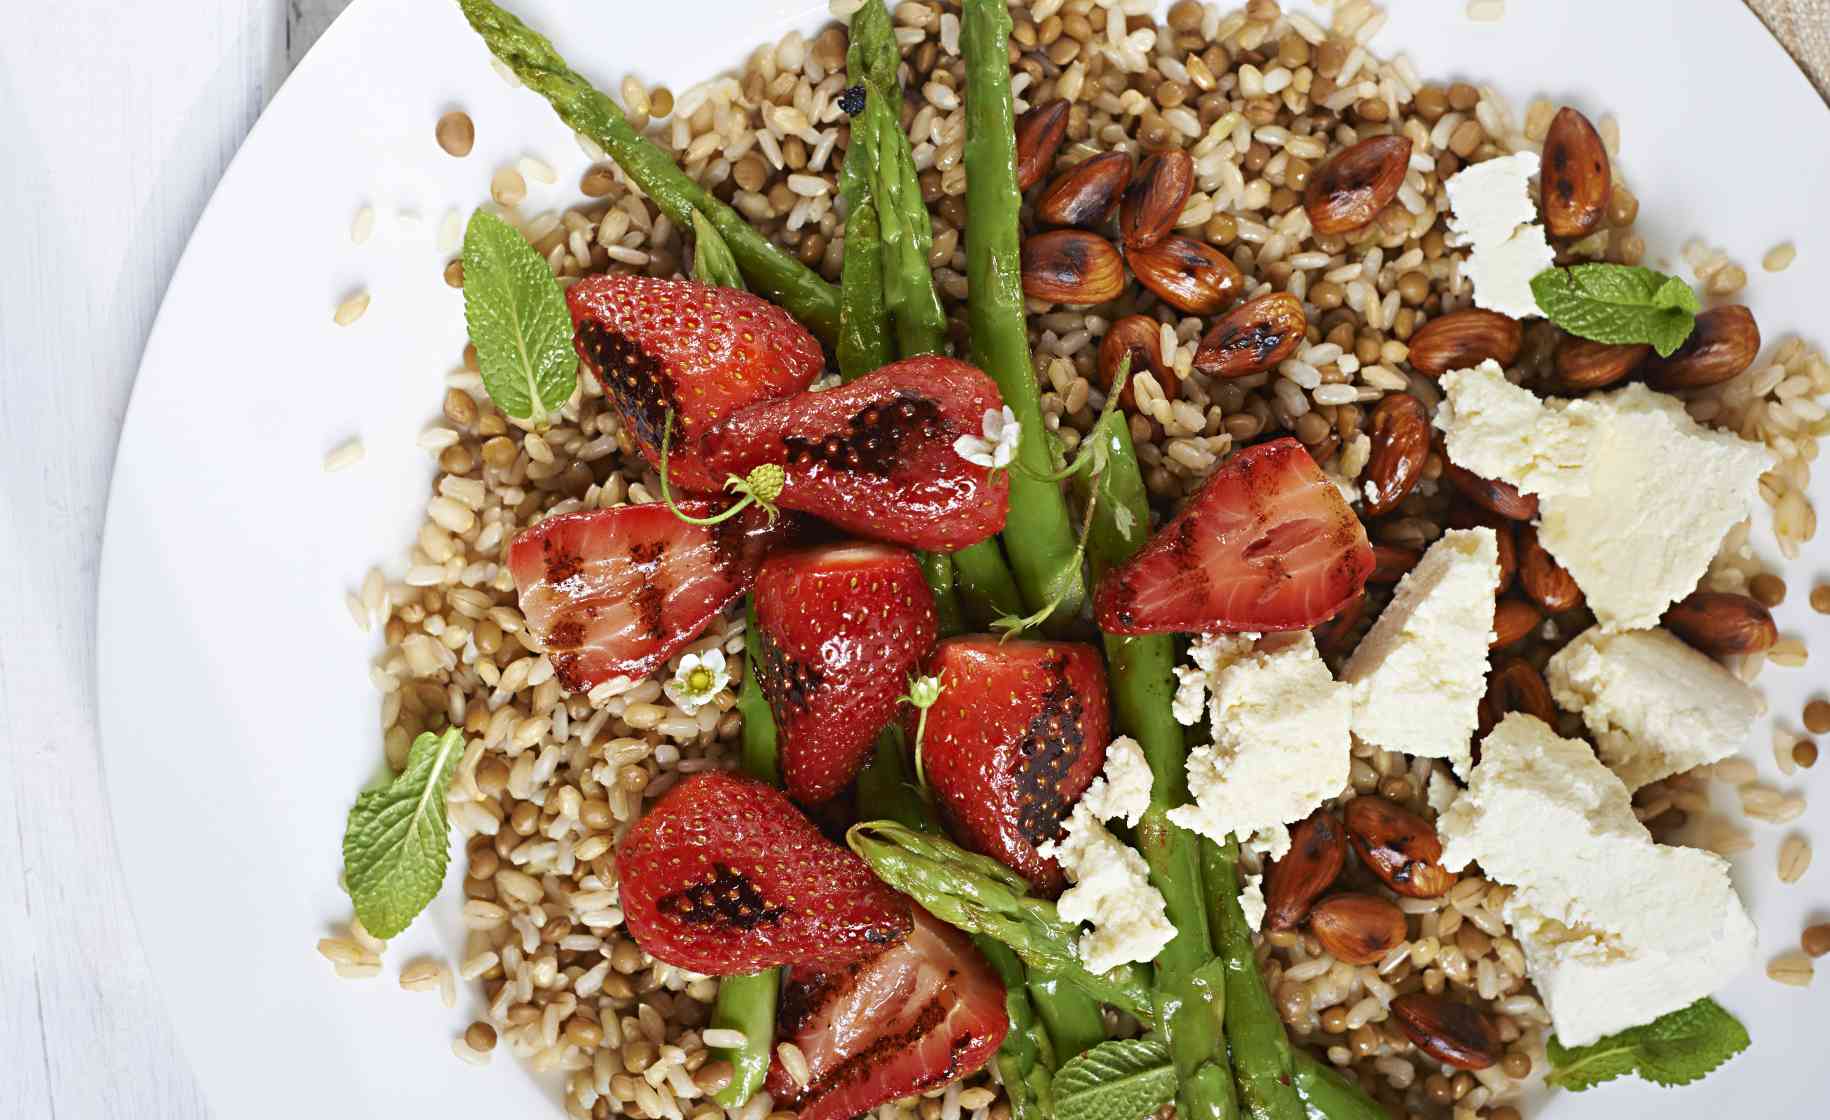 barley-lentil-salad-with-natural-almonds-and-roasted-strawberries-8cfwrozbl2wpo72k3ibtb1a